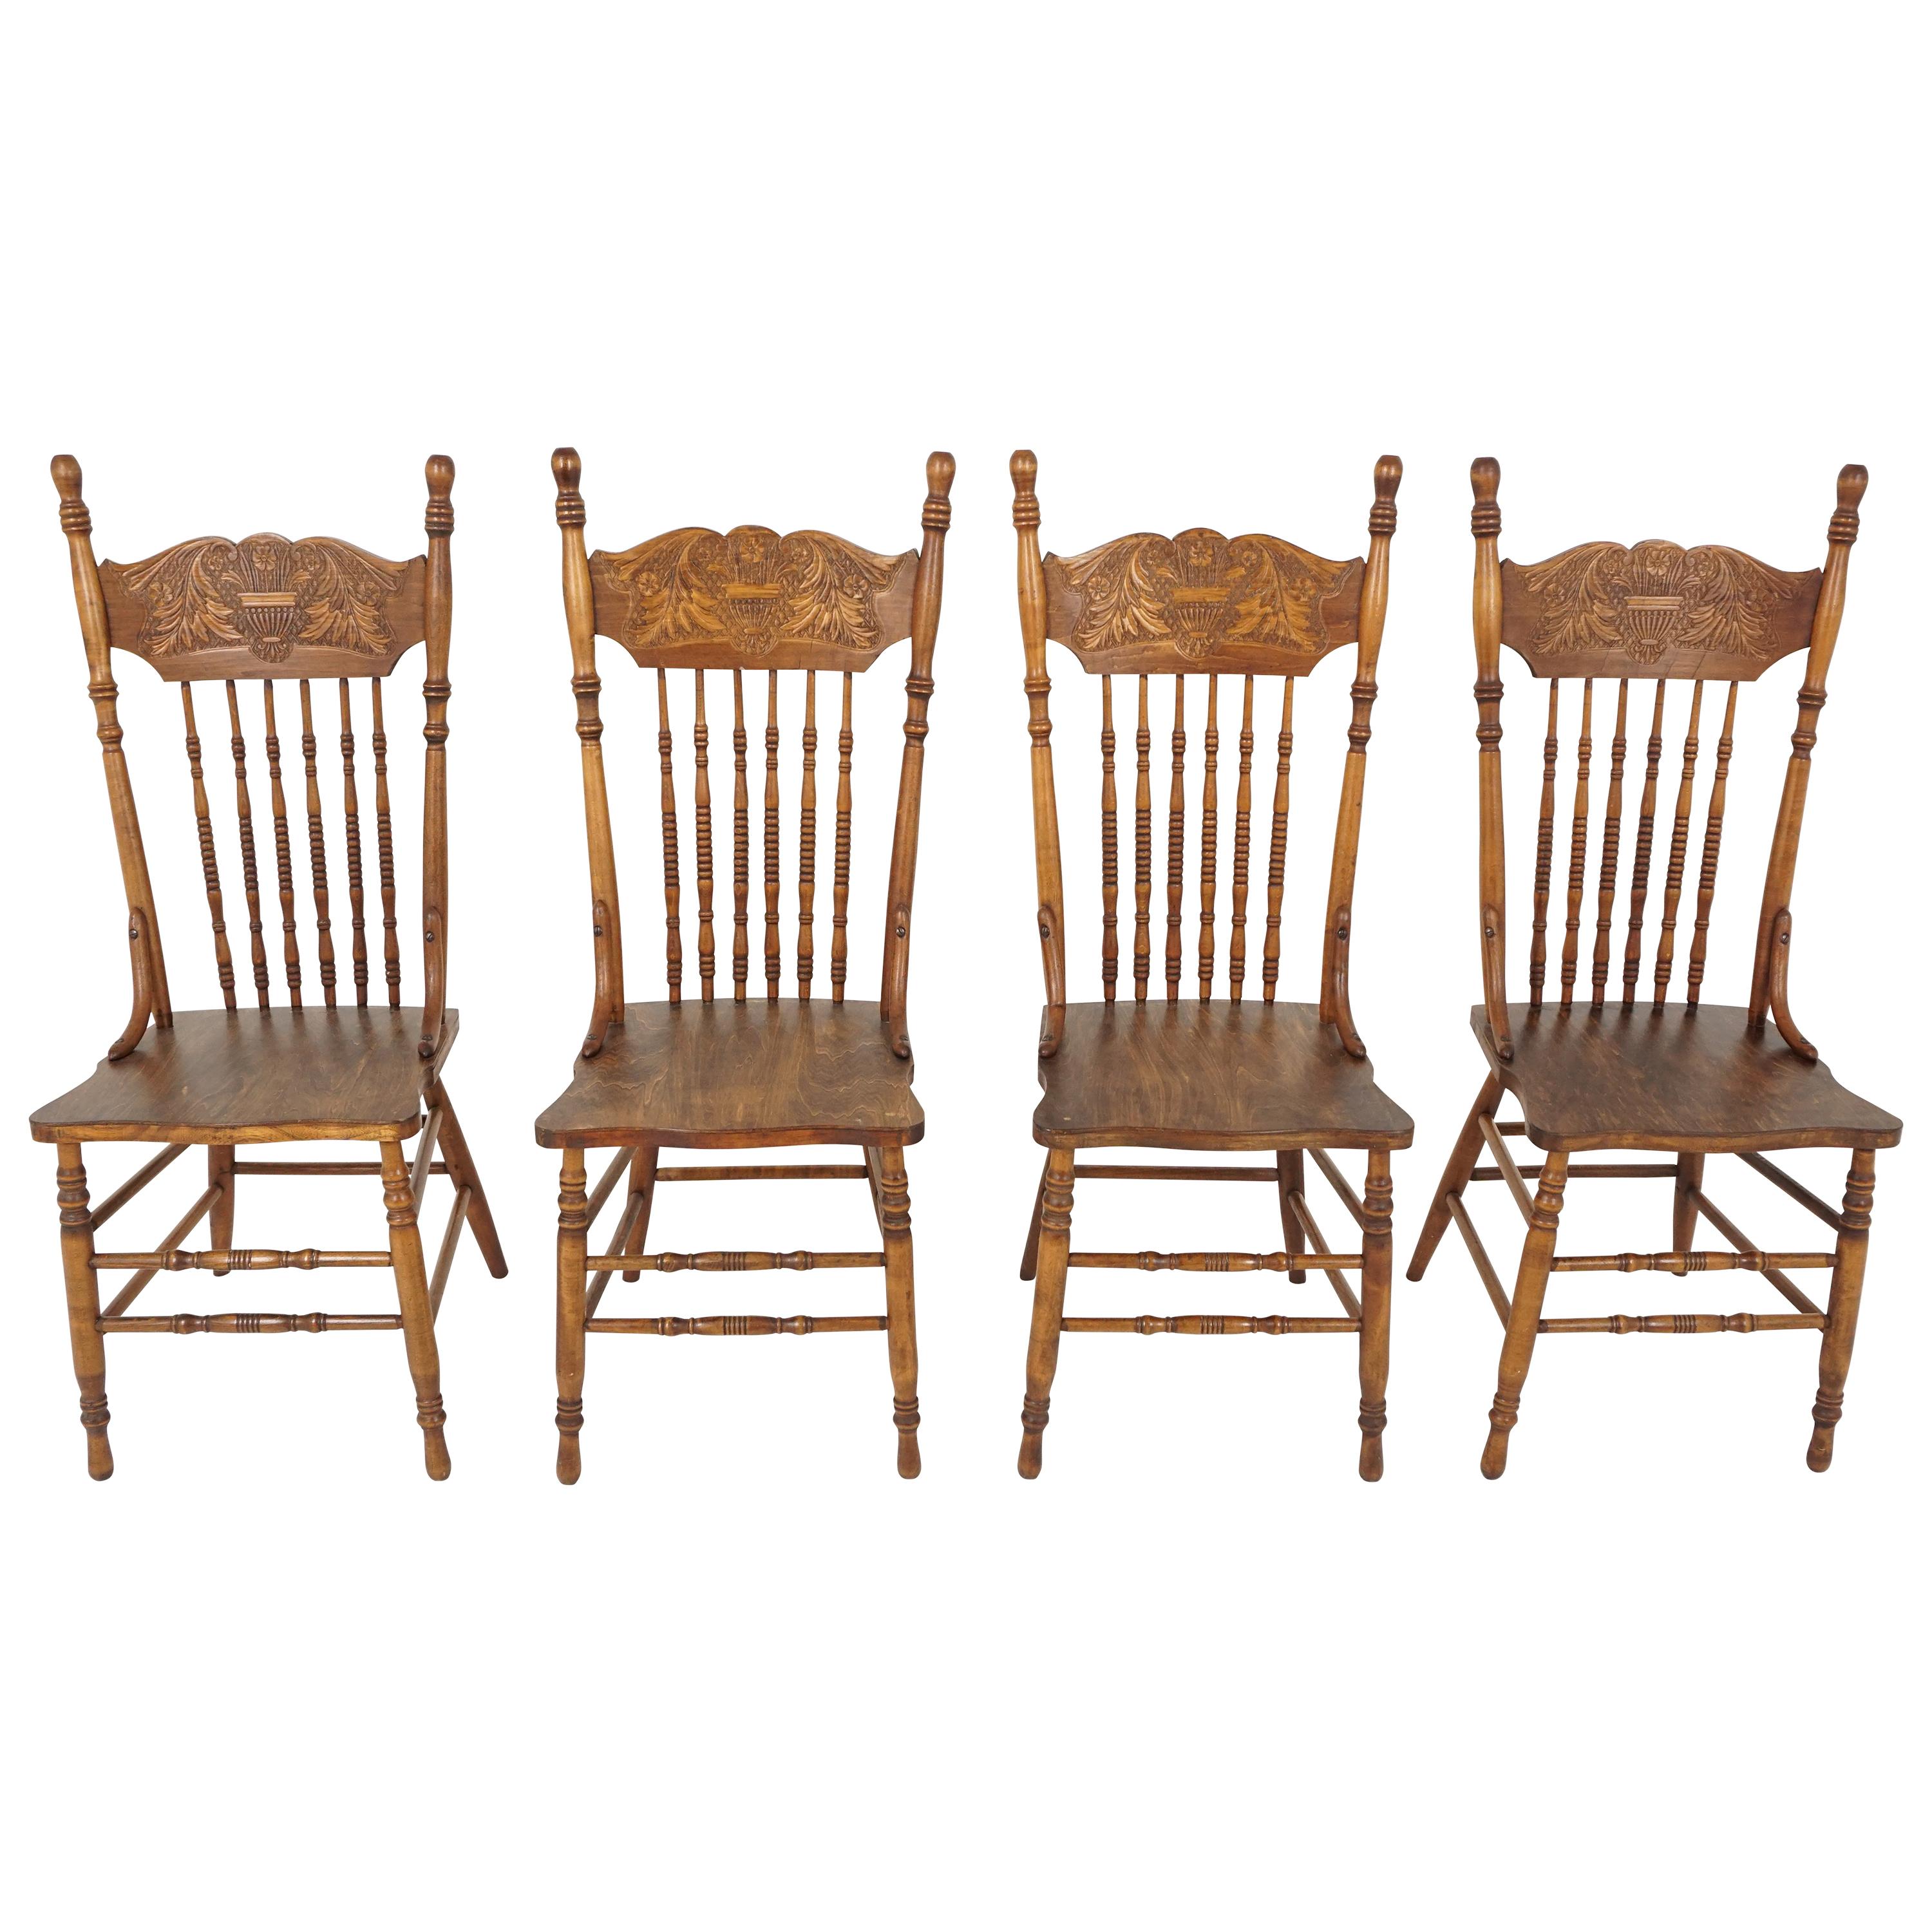 Antique Dining Chairs, Set of 4 Press Back Kitchen Chairs, Canada 1900, B2016